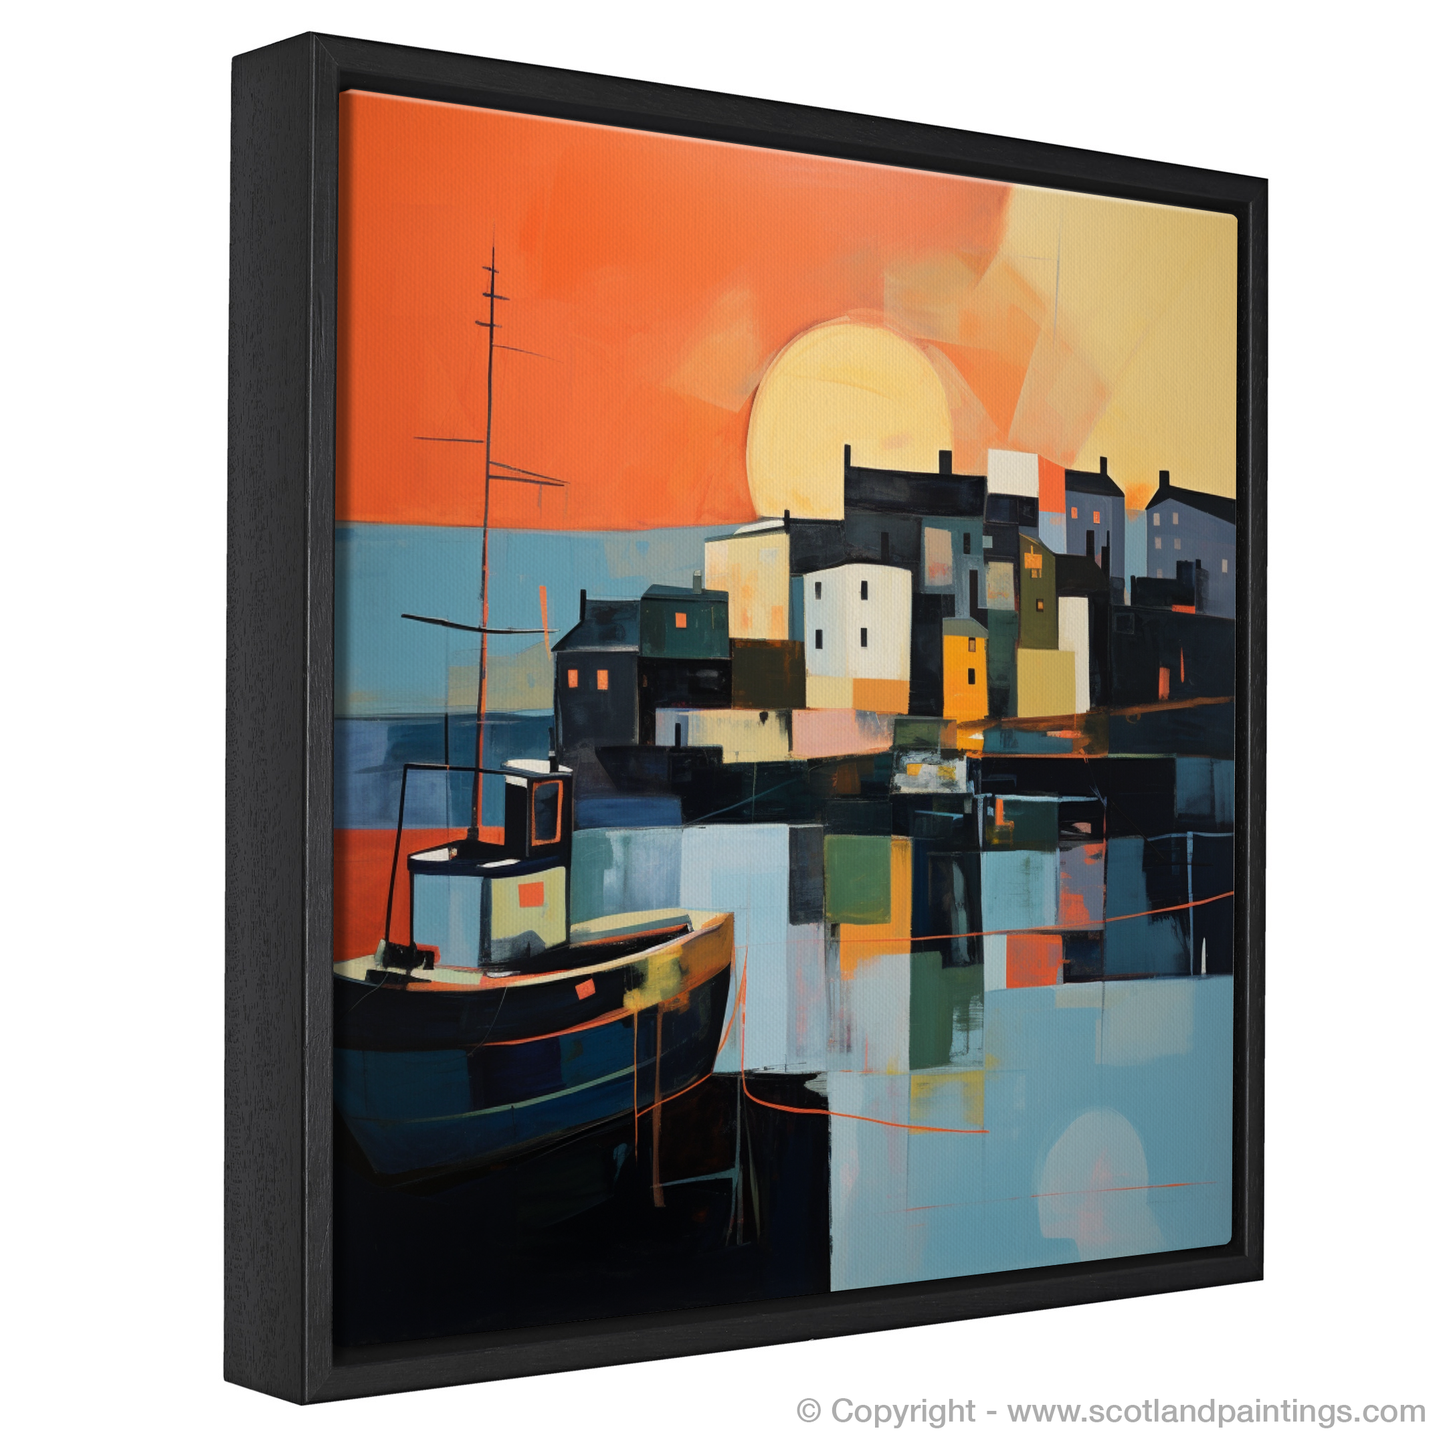 Stonehaven Harbour at Dusk: An Abstract Coastal Reverie